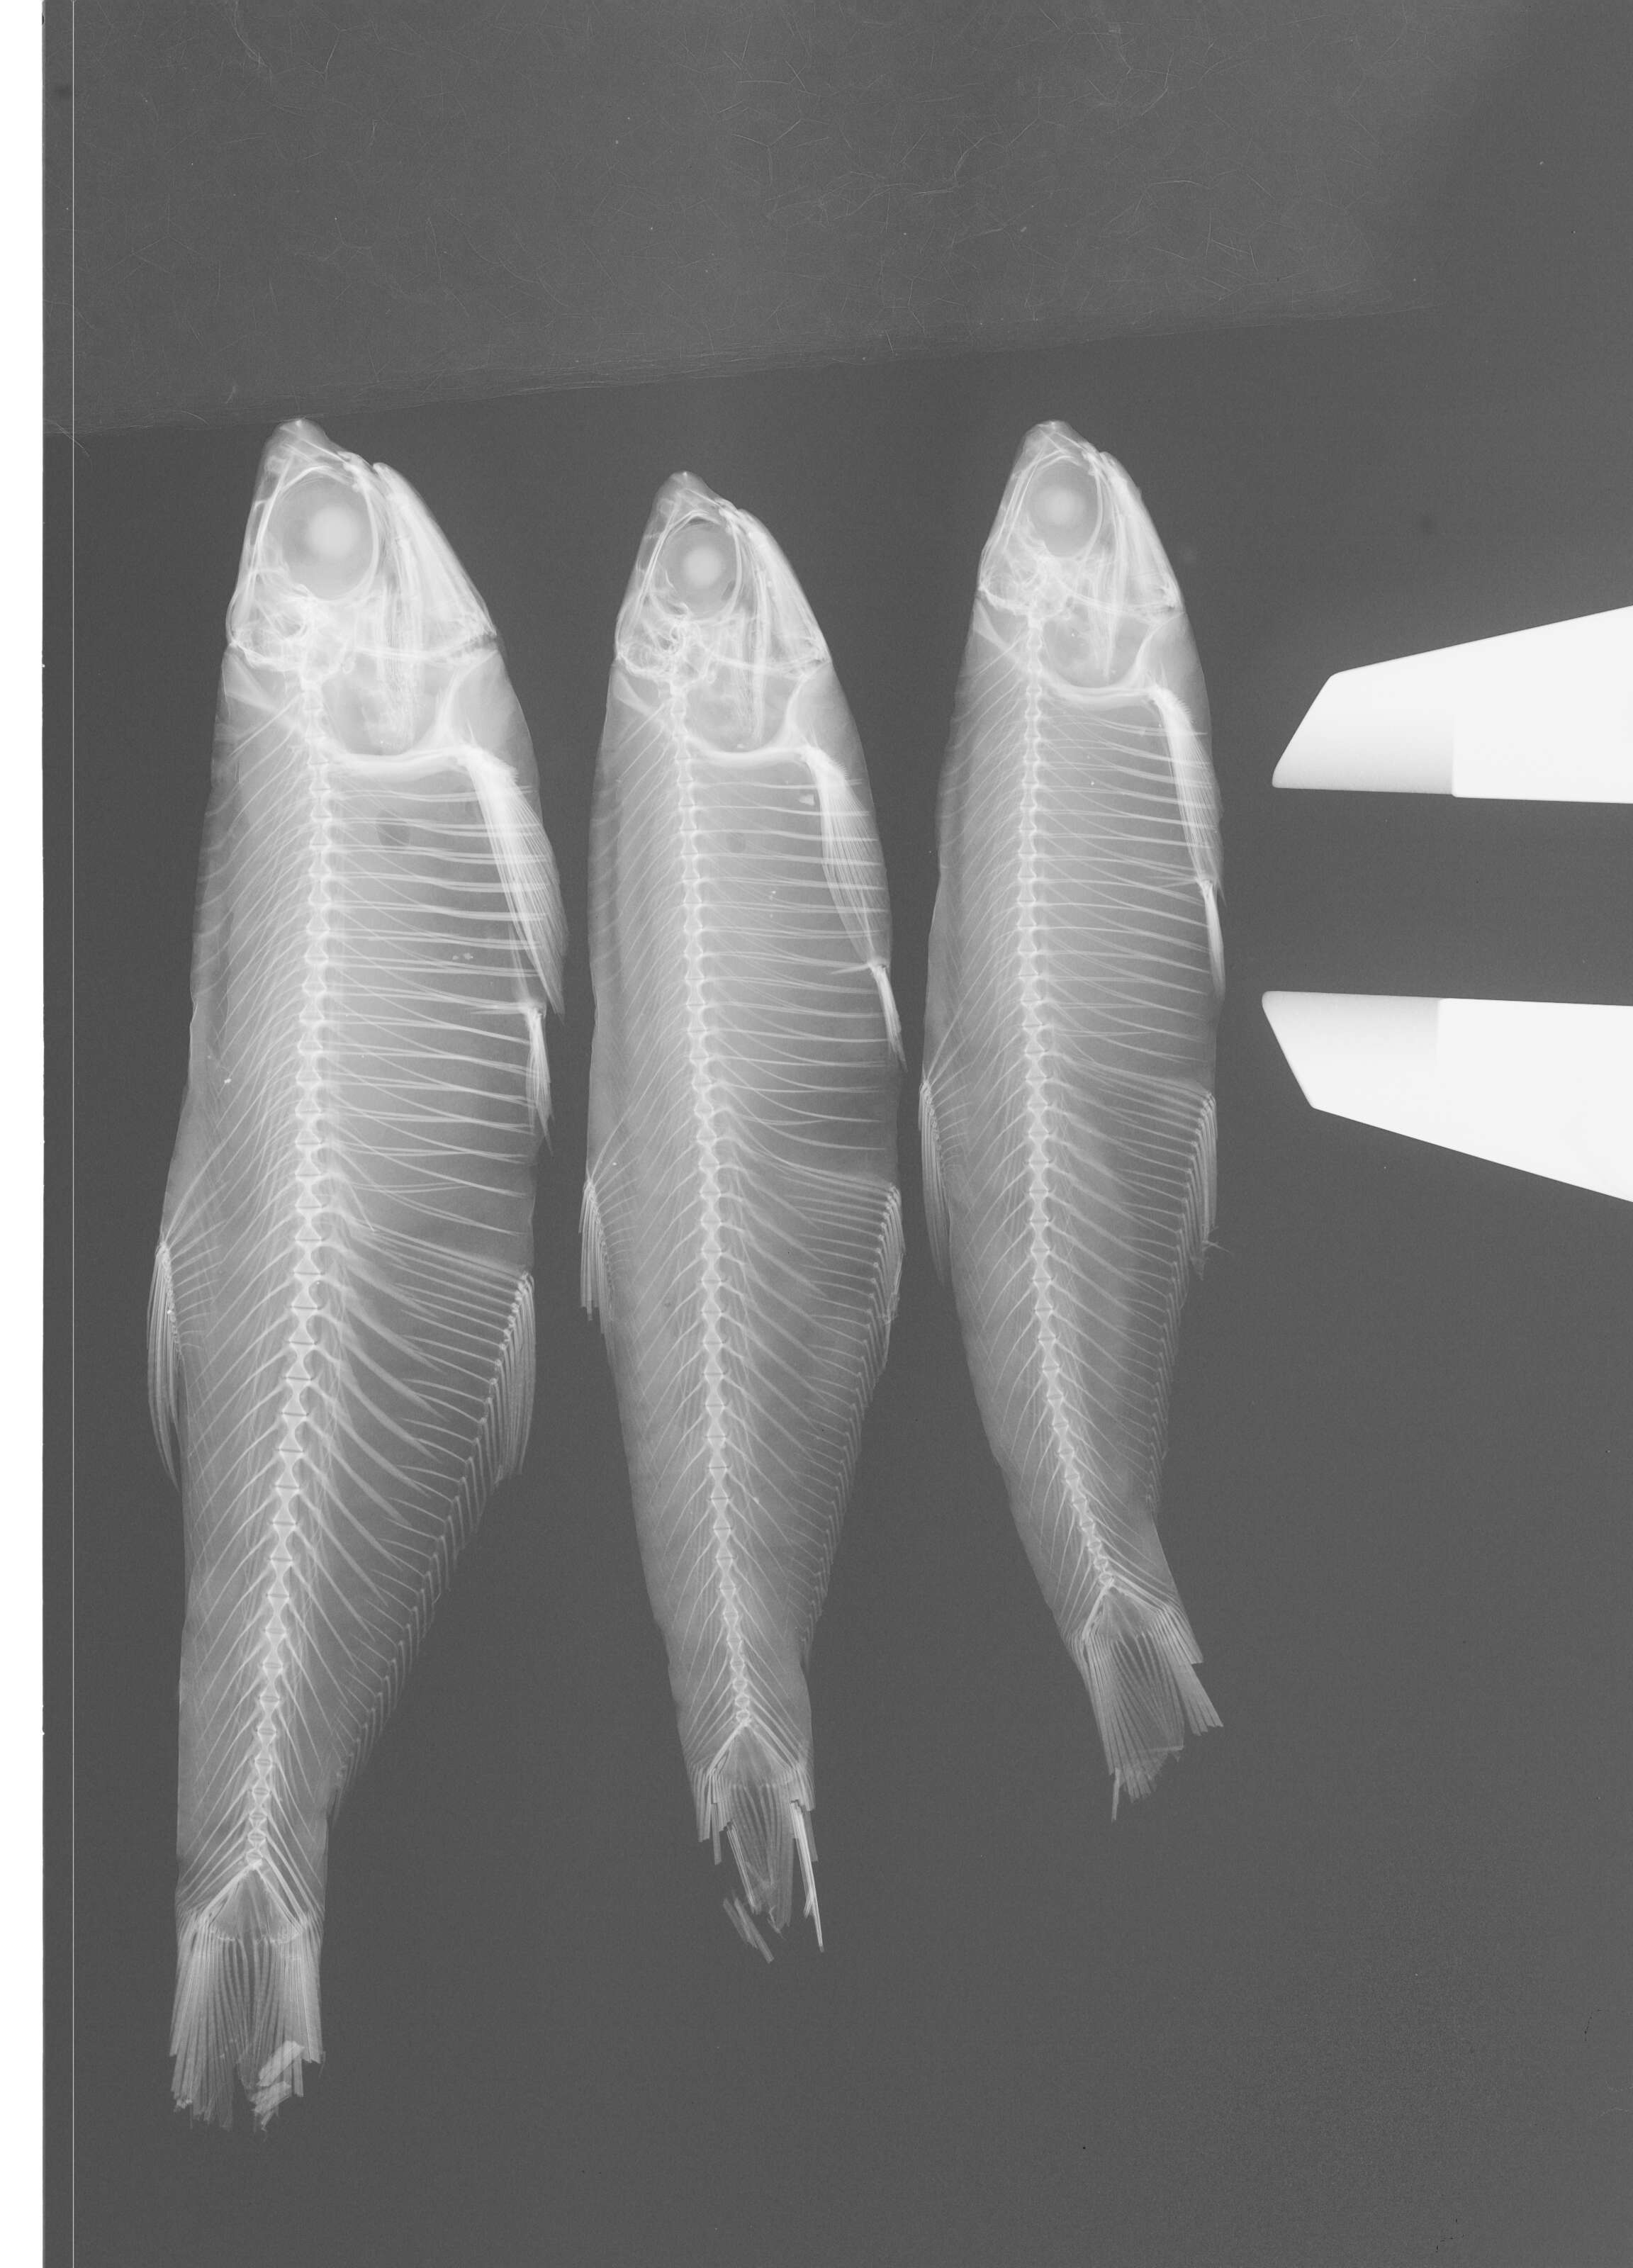 Image of Longfin Pacific anchovy